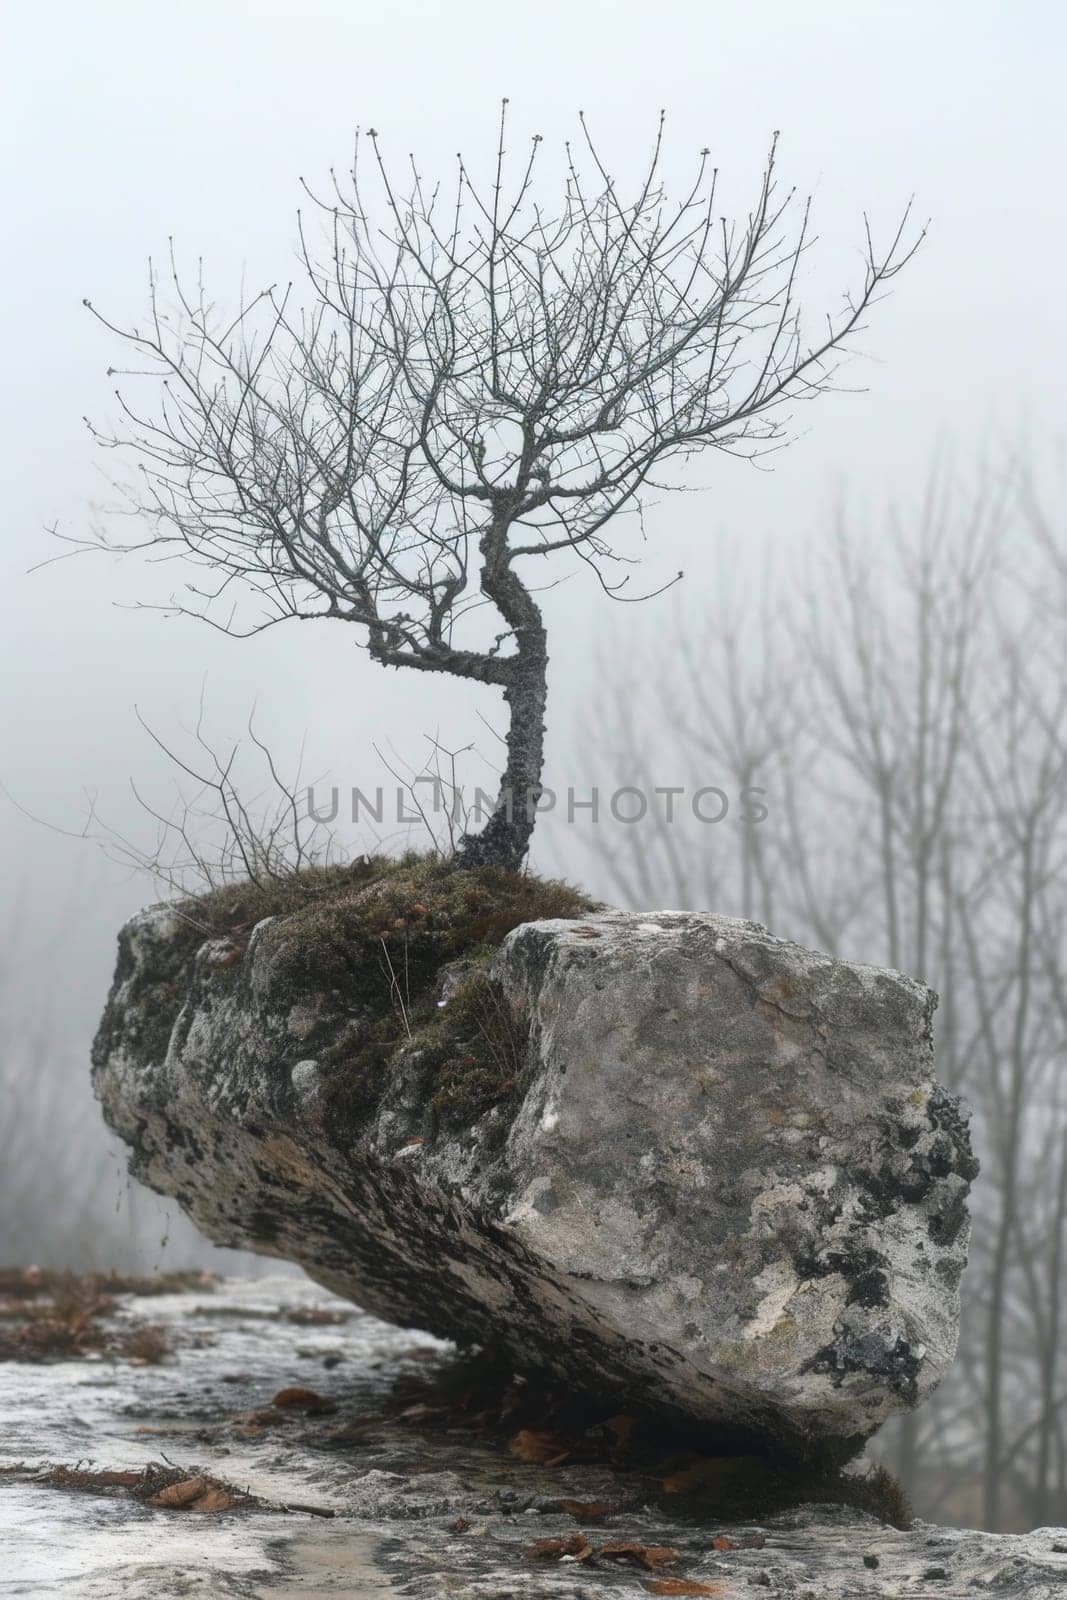 A tree growing on a rock. The roots are breaking through the rocks.